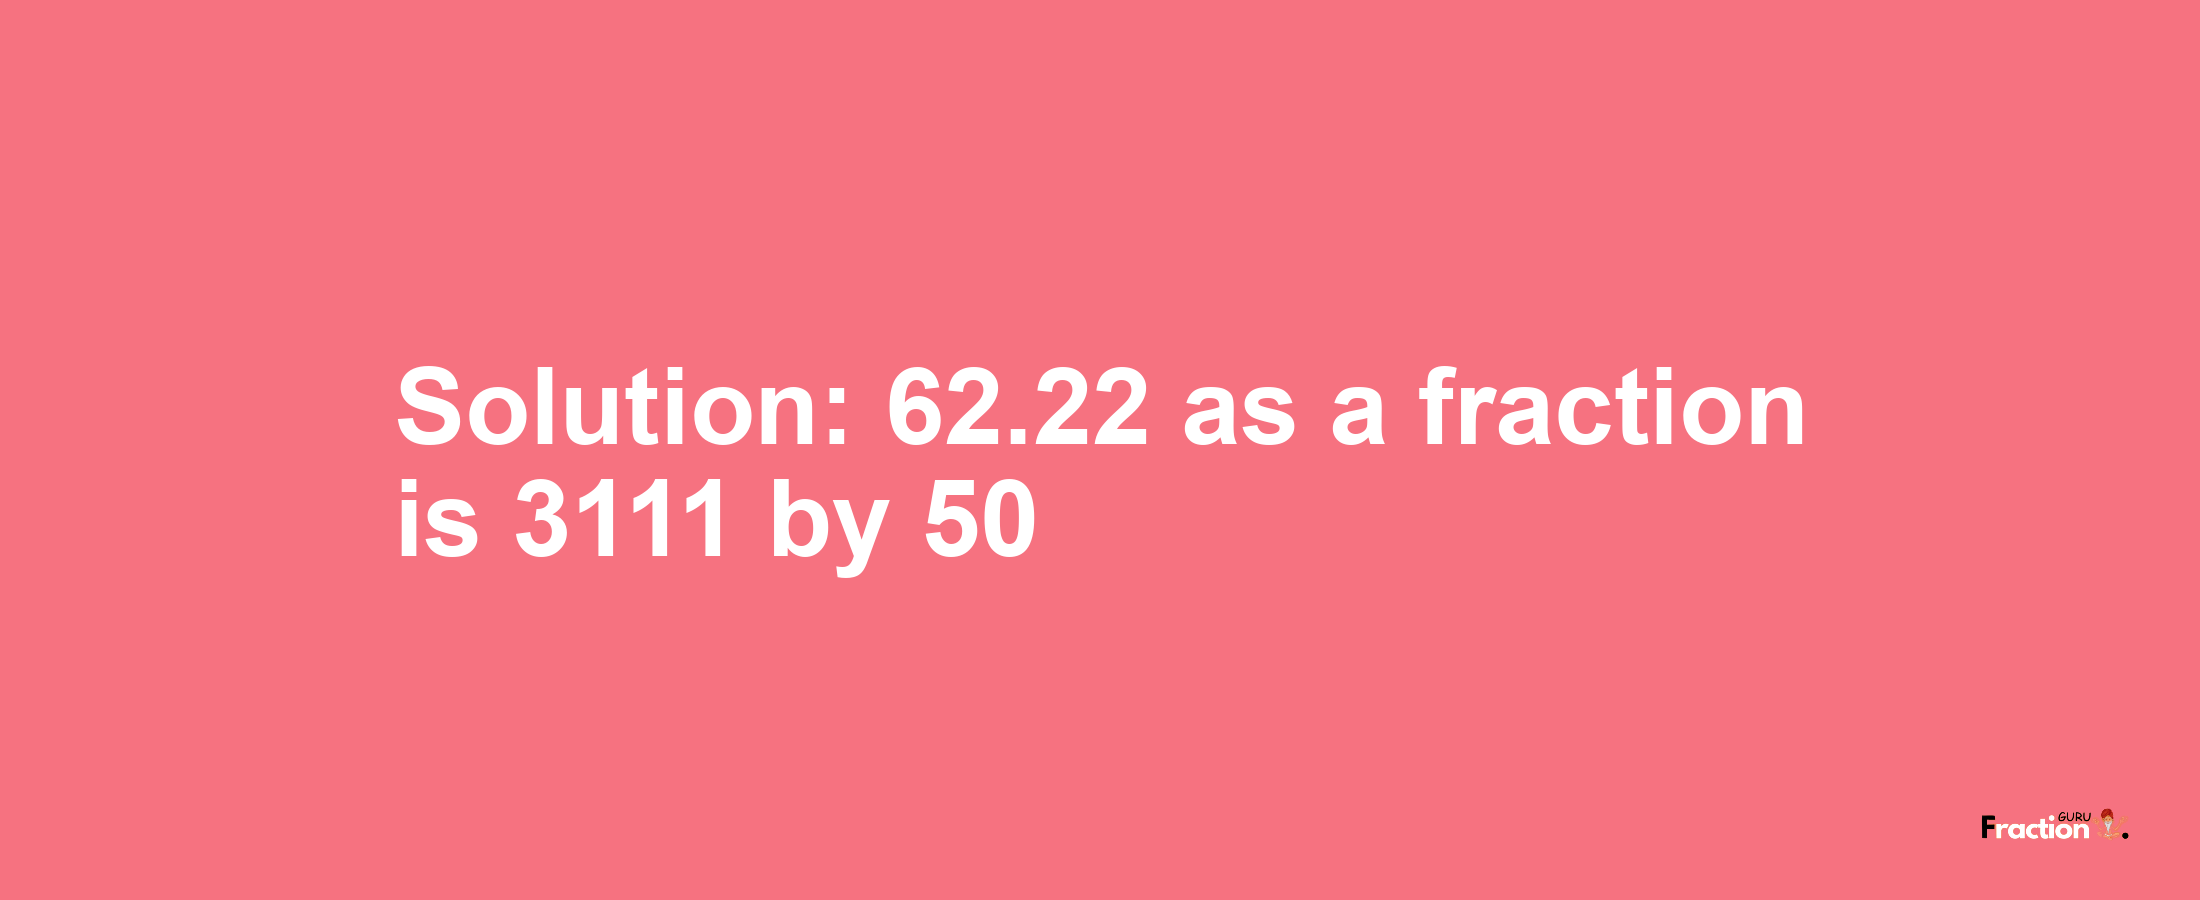 Solution:62.22 as a fraction is 3111/50